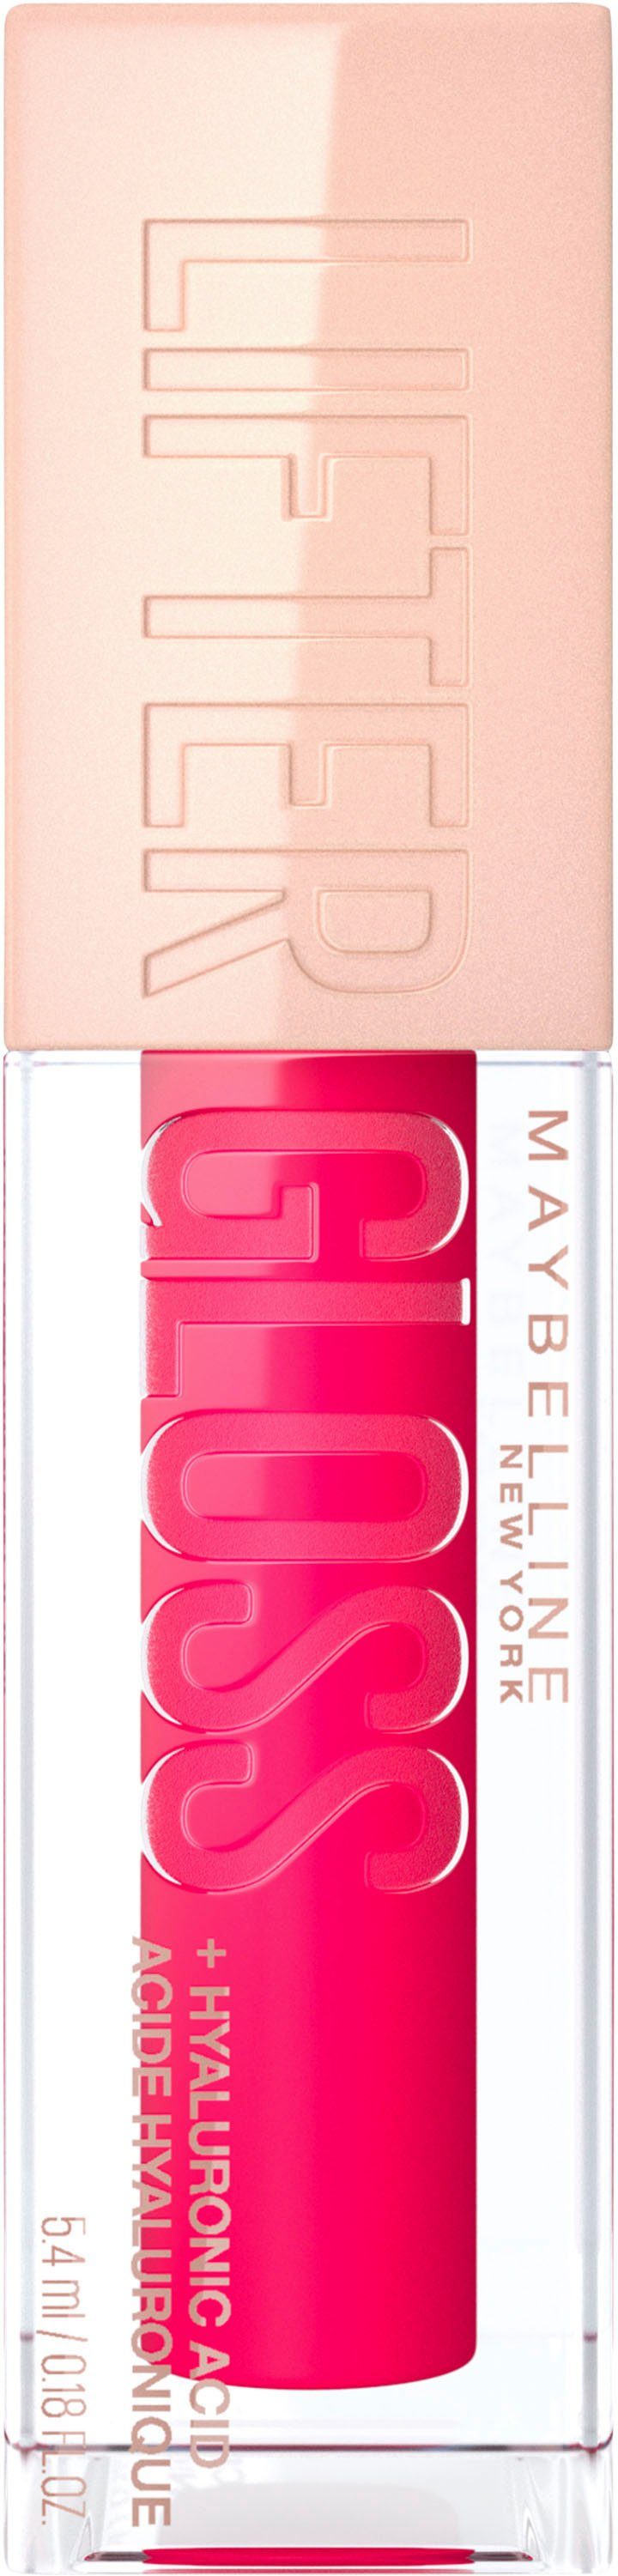 Gloss New York Lipgloss YORK MAYBELLINE Lifter NEW Maybelline